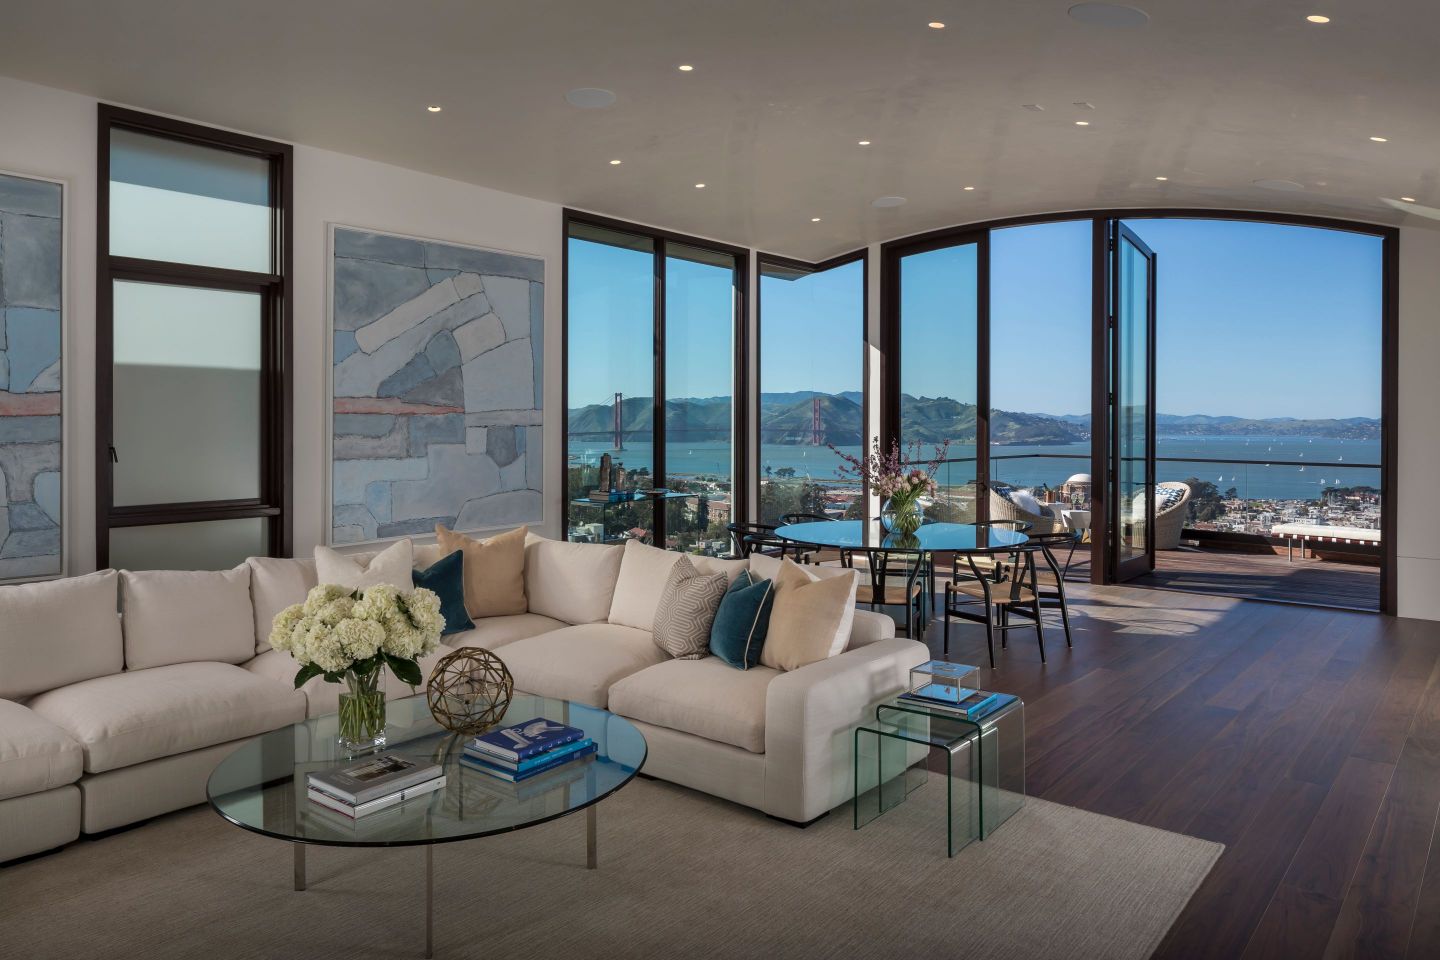 Peek Inside! The Most Expensive Home for Sale in San Francisco
